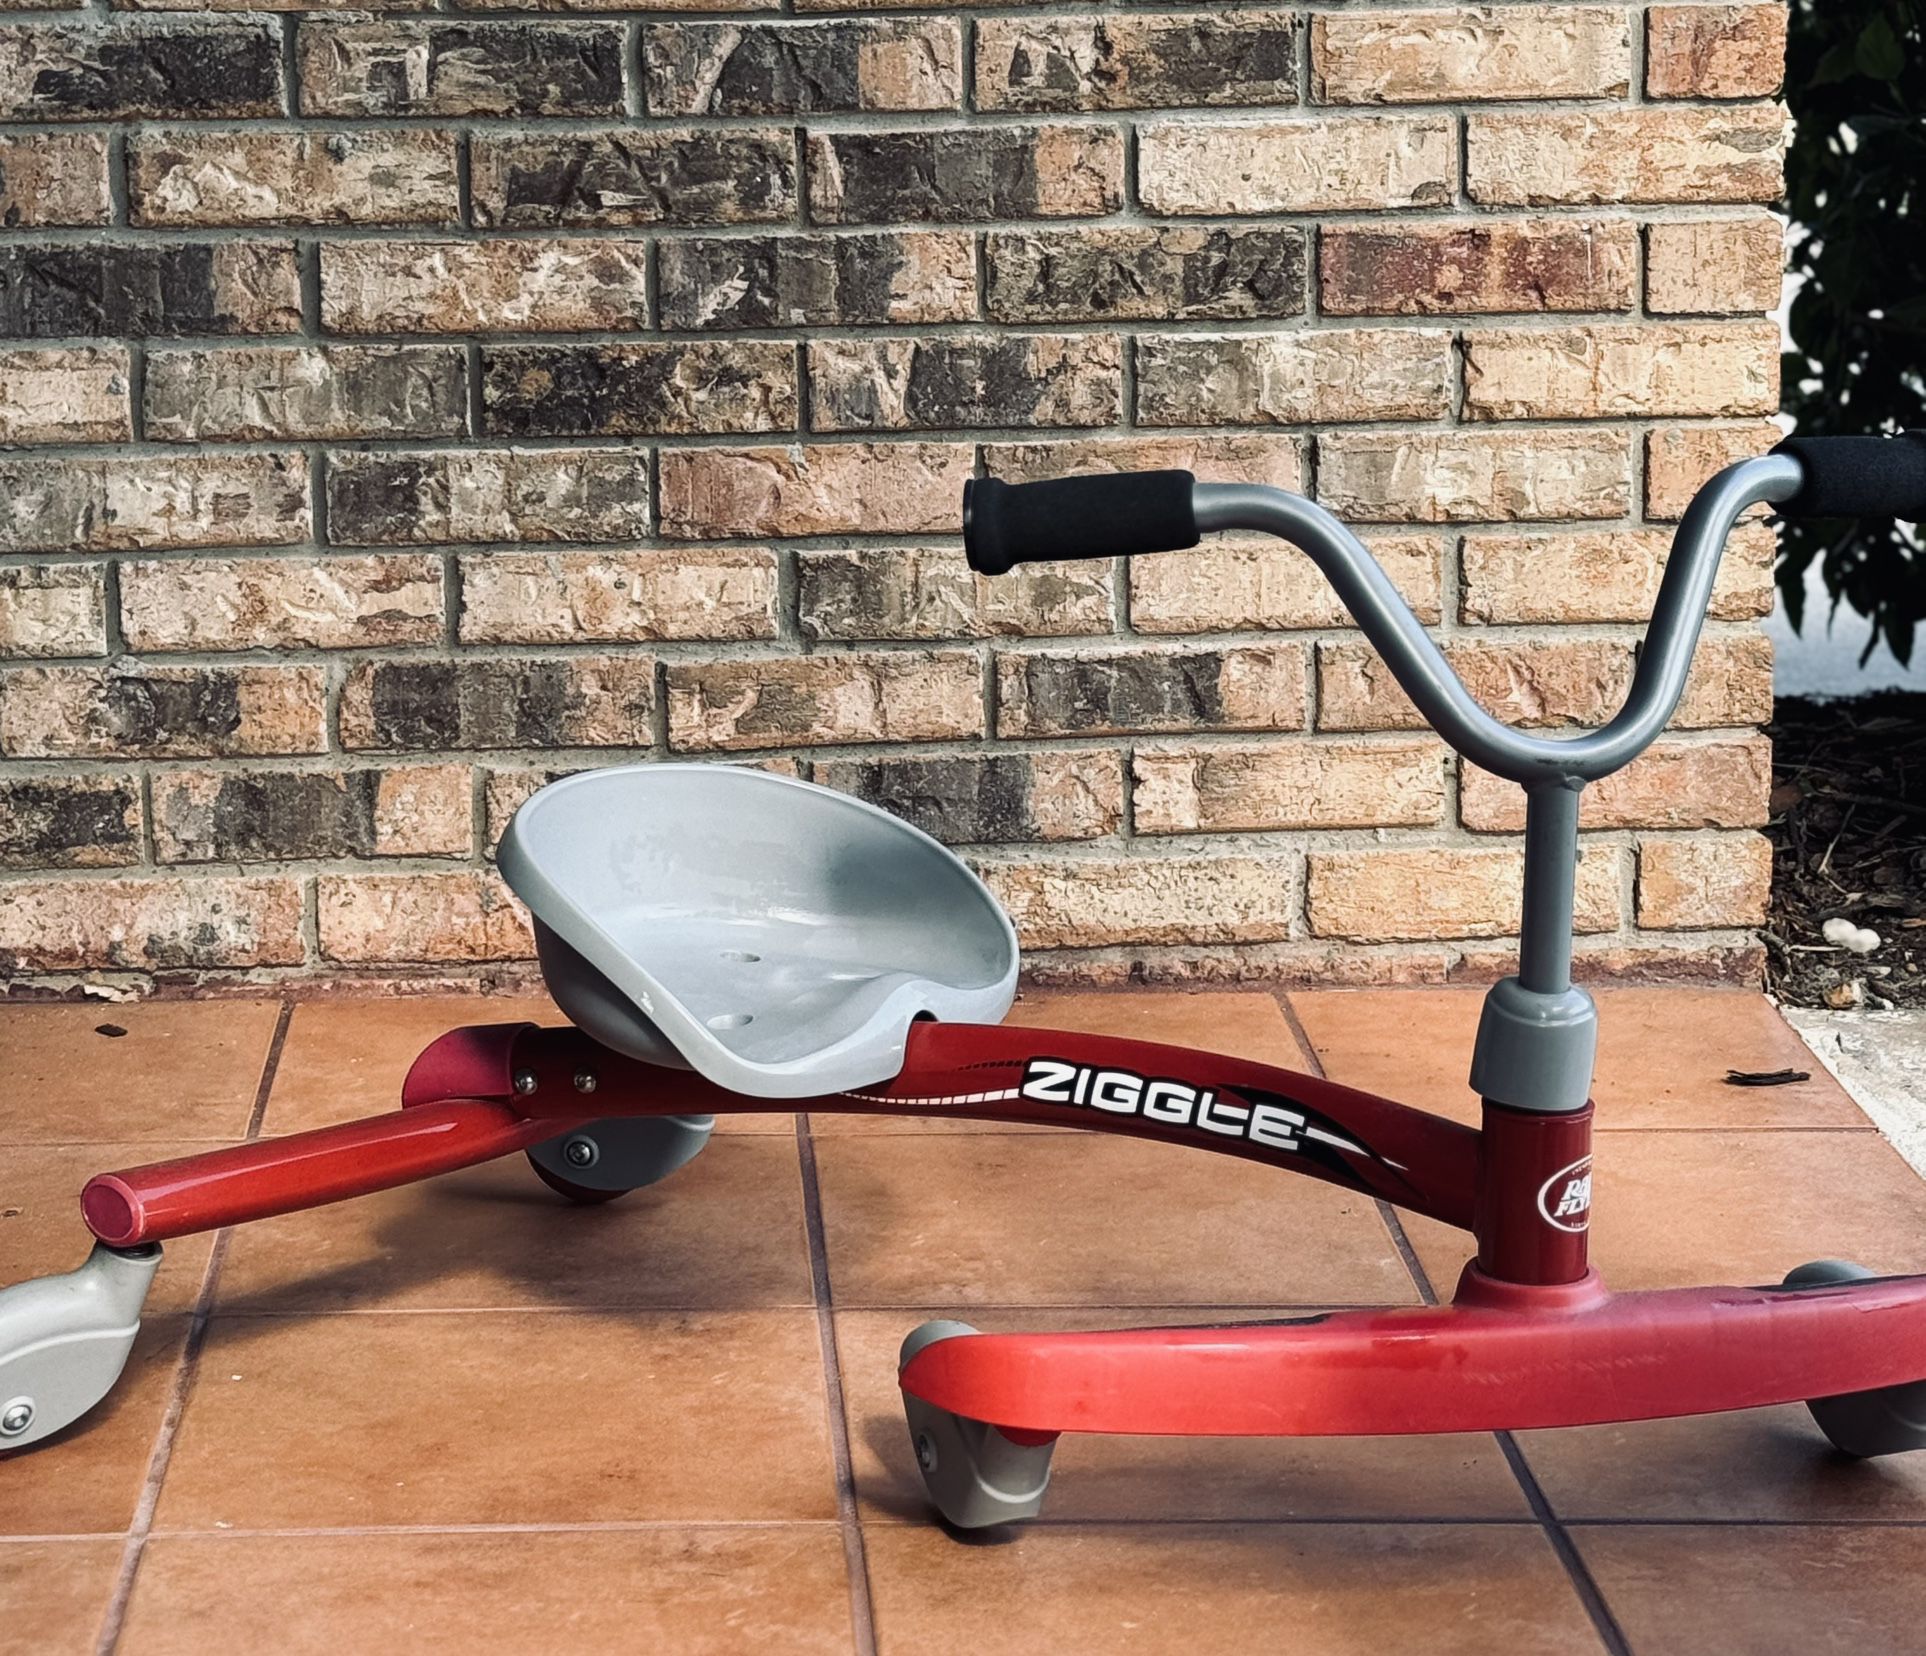 Zoom & Twirl with Radio Flyer Ziggle - The Ultimate Ride-On for Kids!